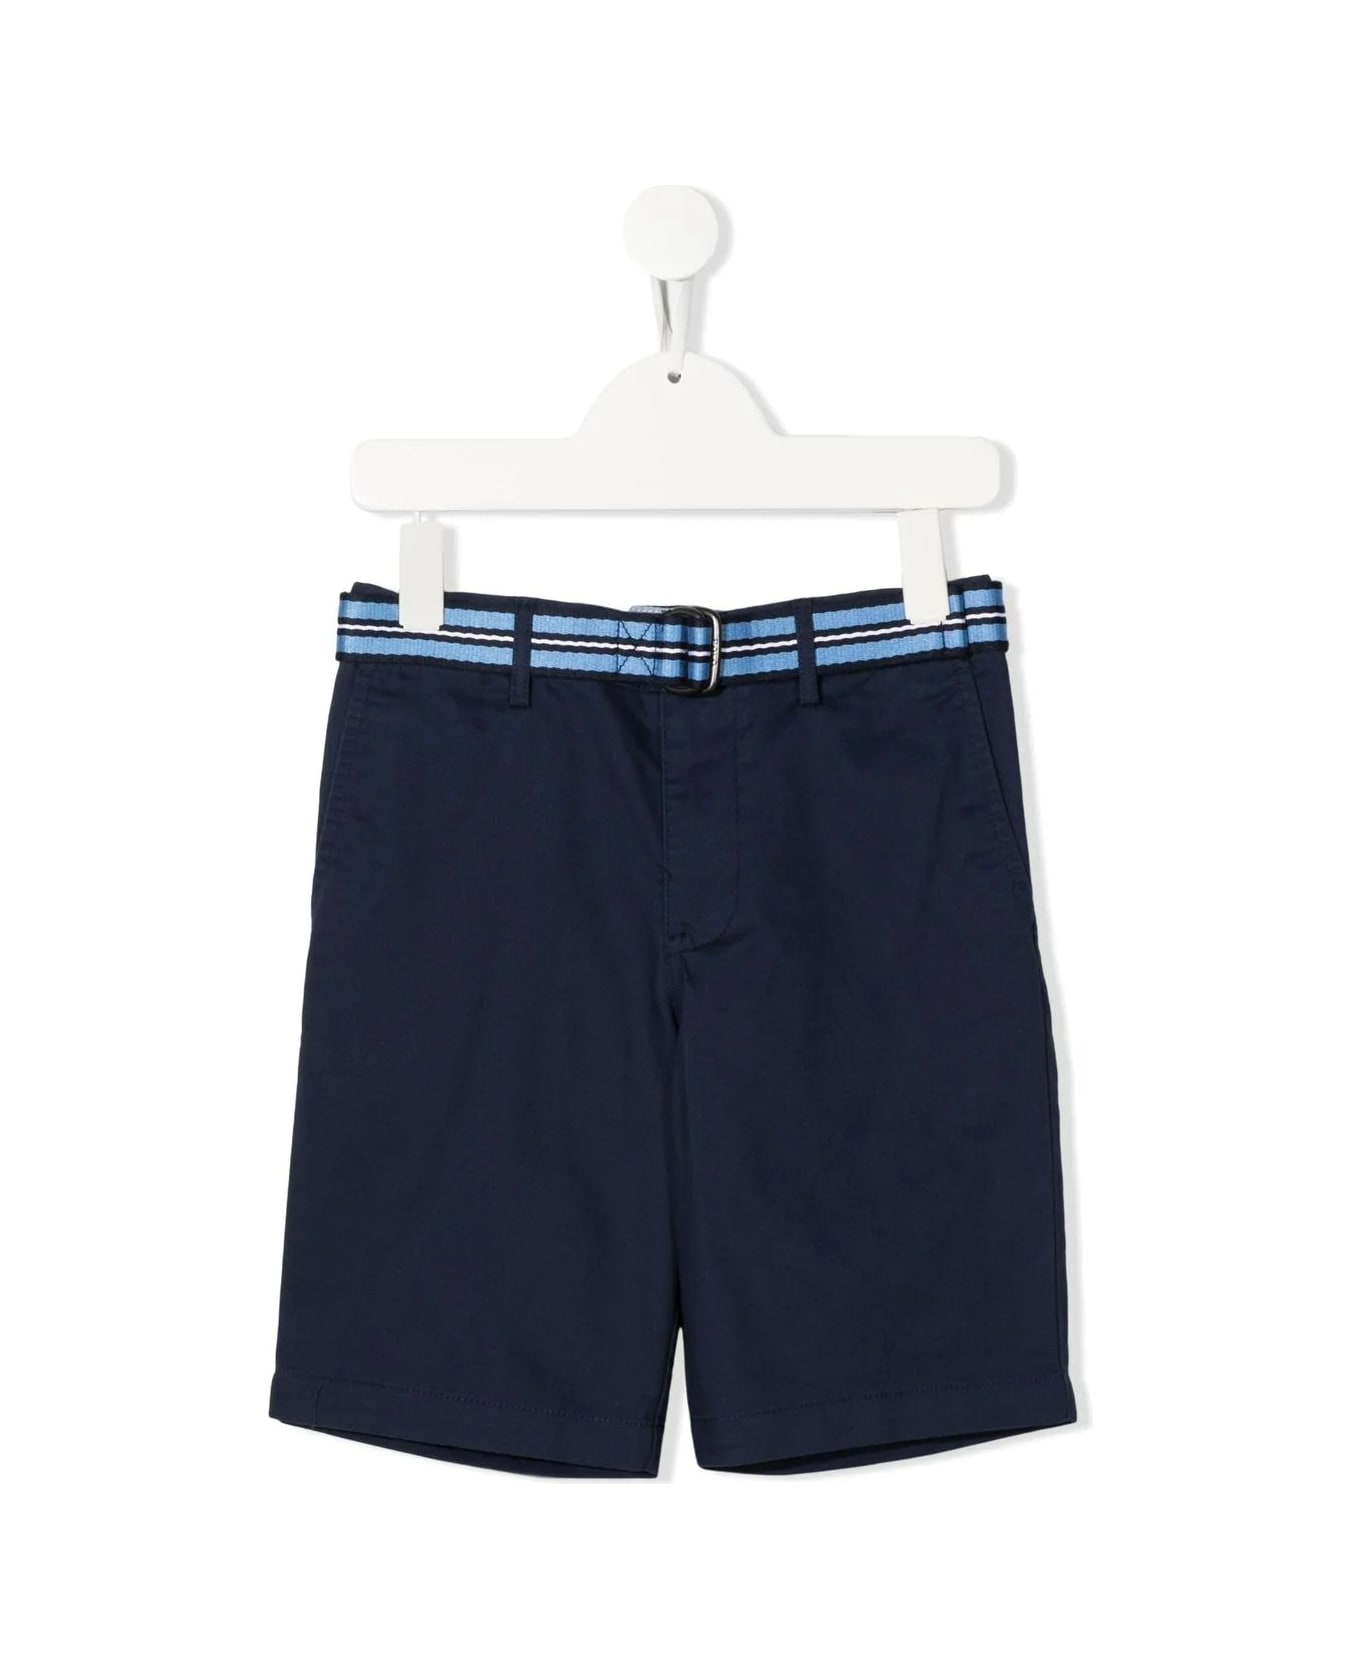 Ralph Lauren Shorts In Navy Blue Stretch Chino With Belt - Navy ボトムス